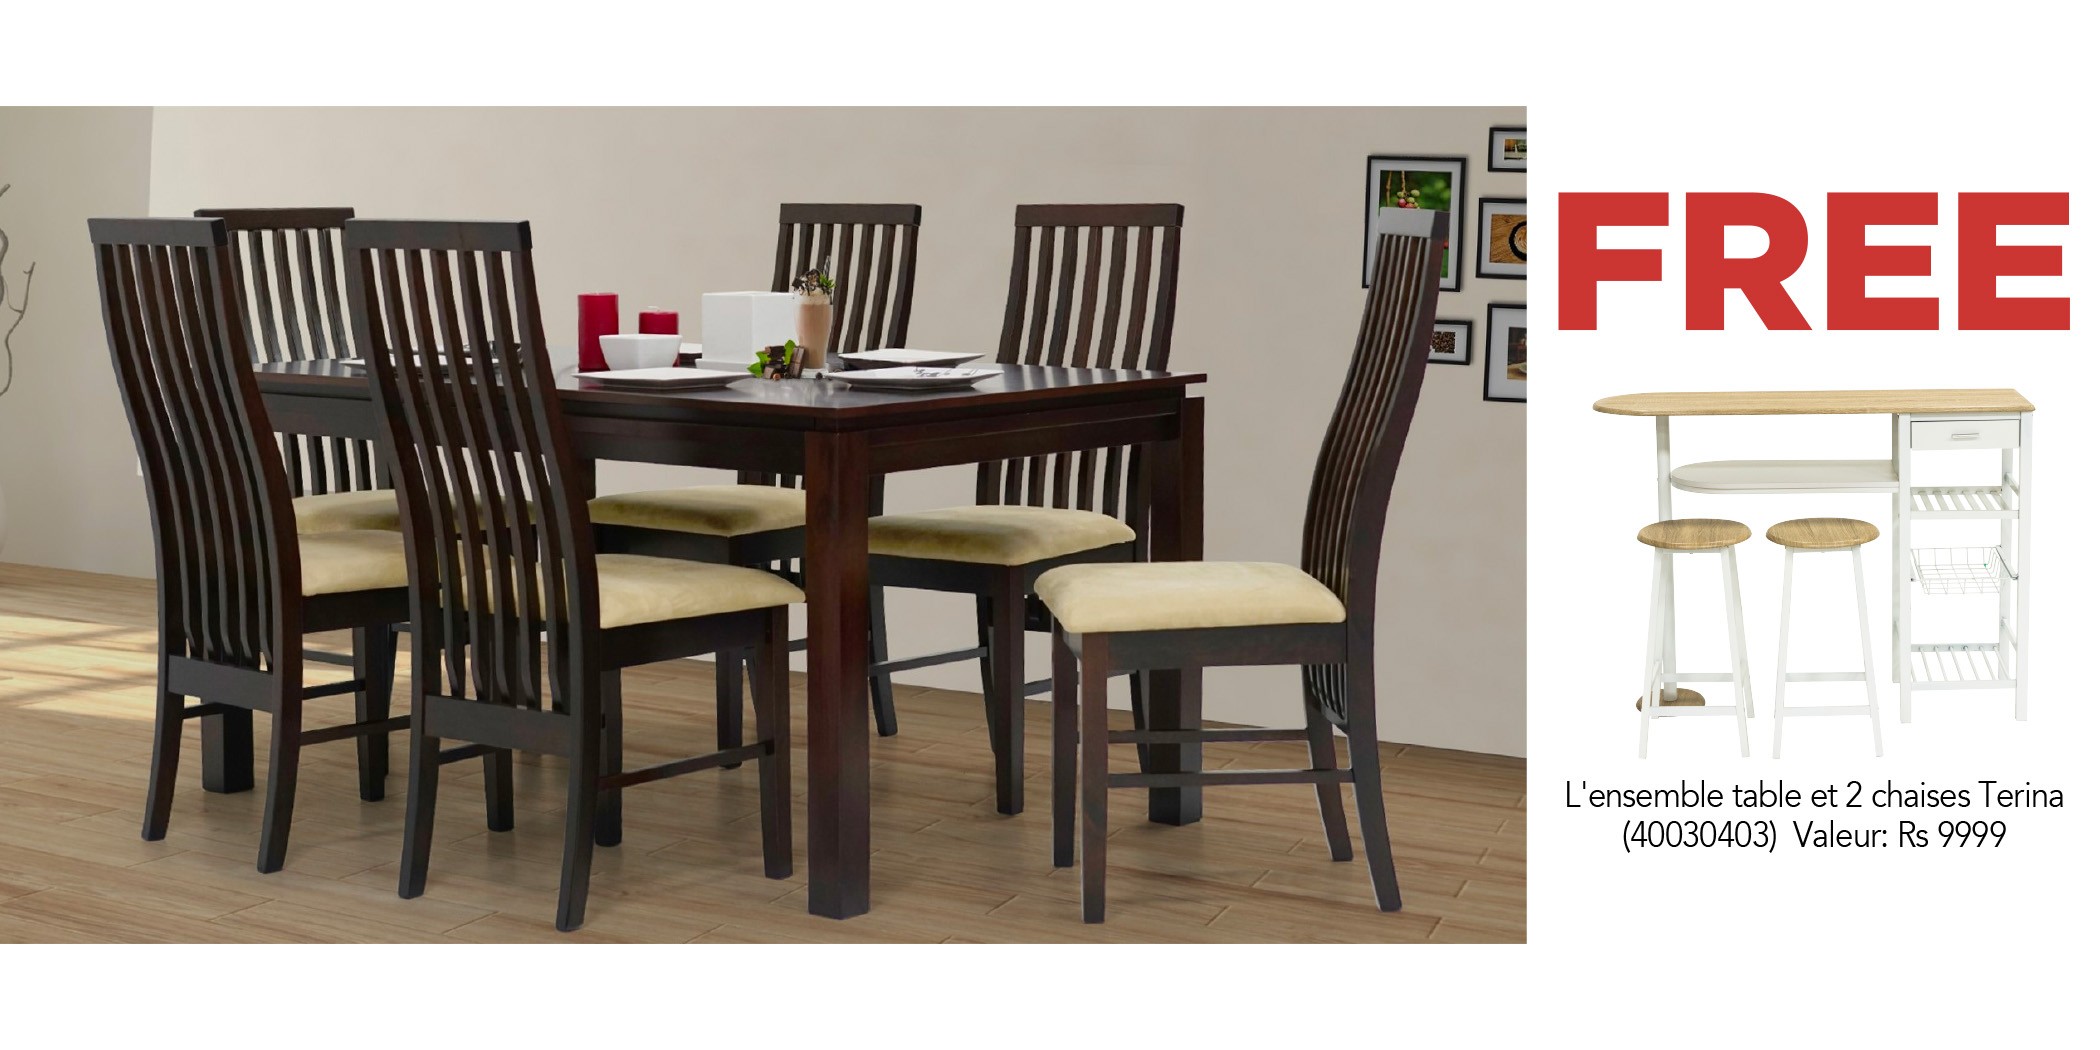 Caribean Table and 6 Chairs Rubberwood & Free Terina Table and 2 Stools ...